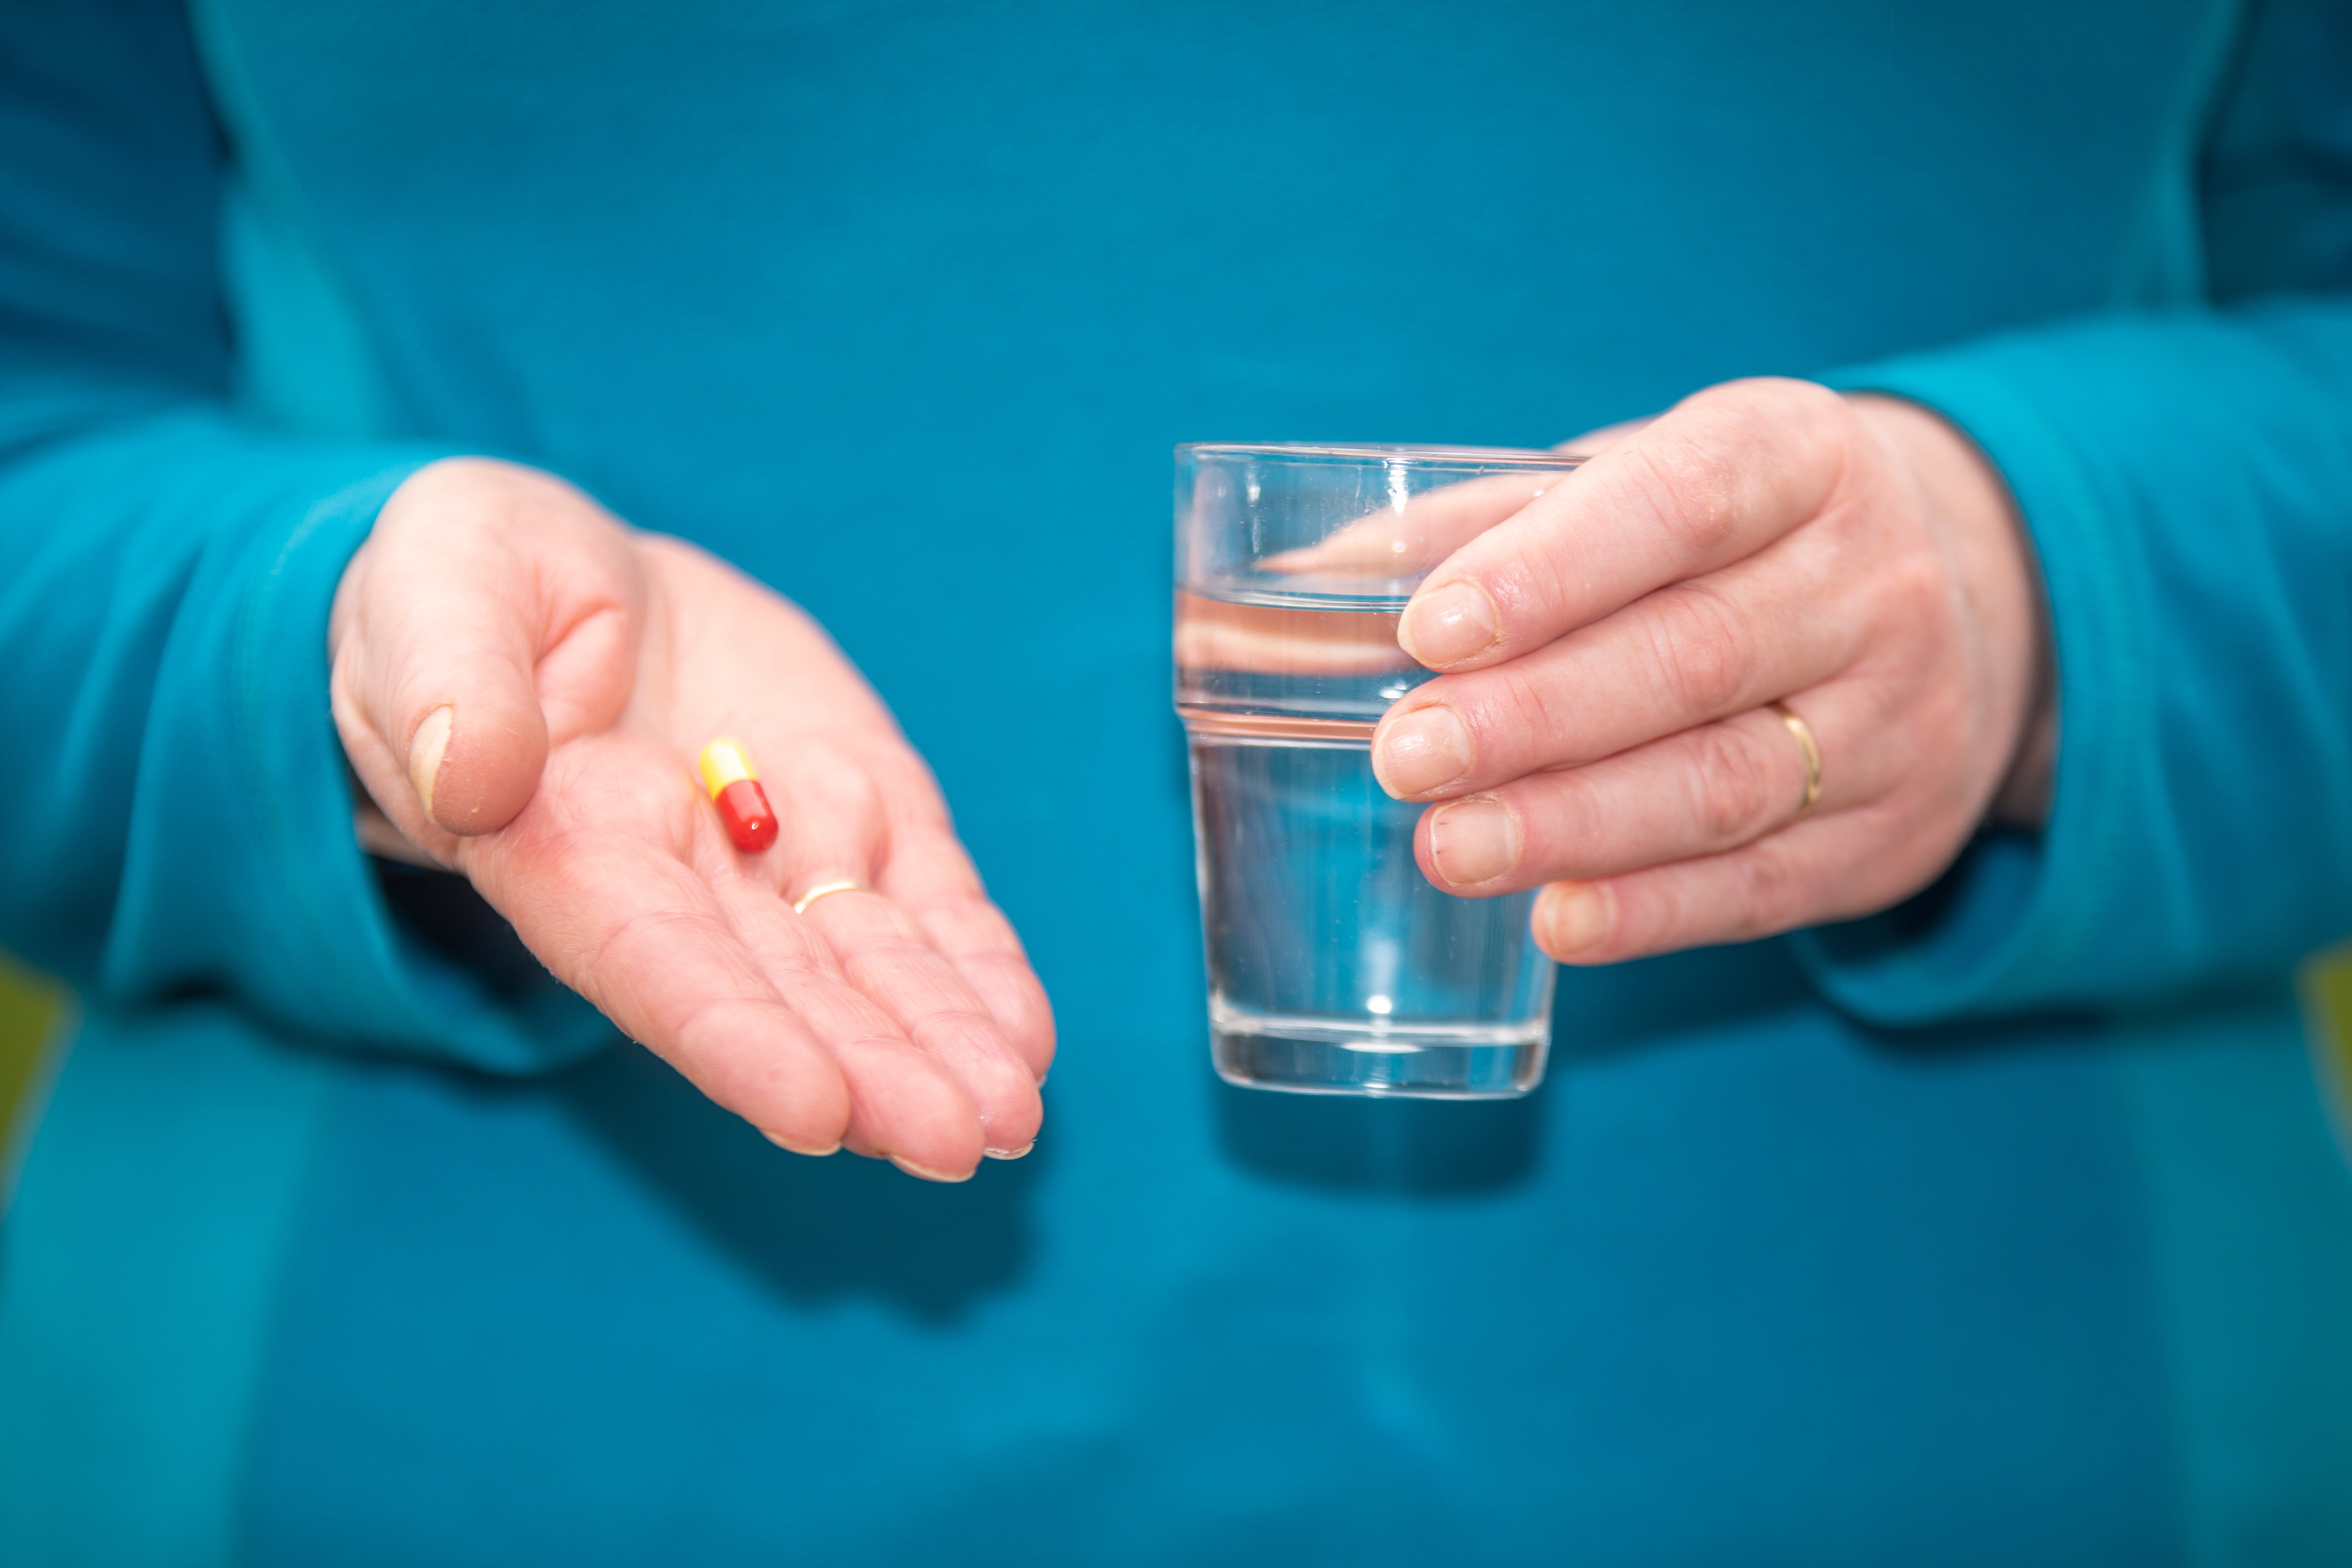 Habits like regularly taking vitamins was one way Brits proactively tried to prevent illness